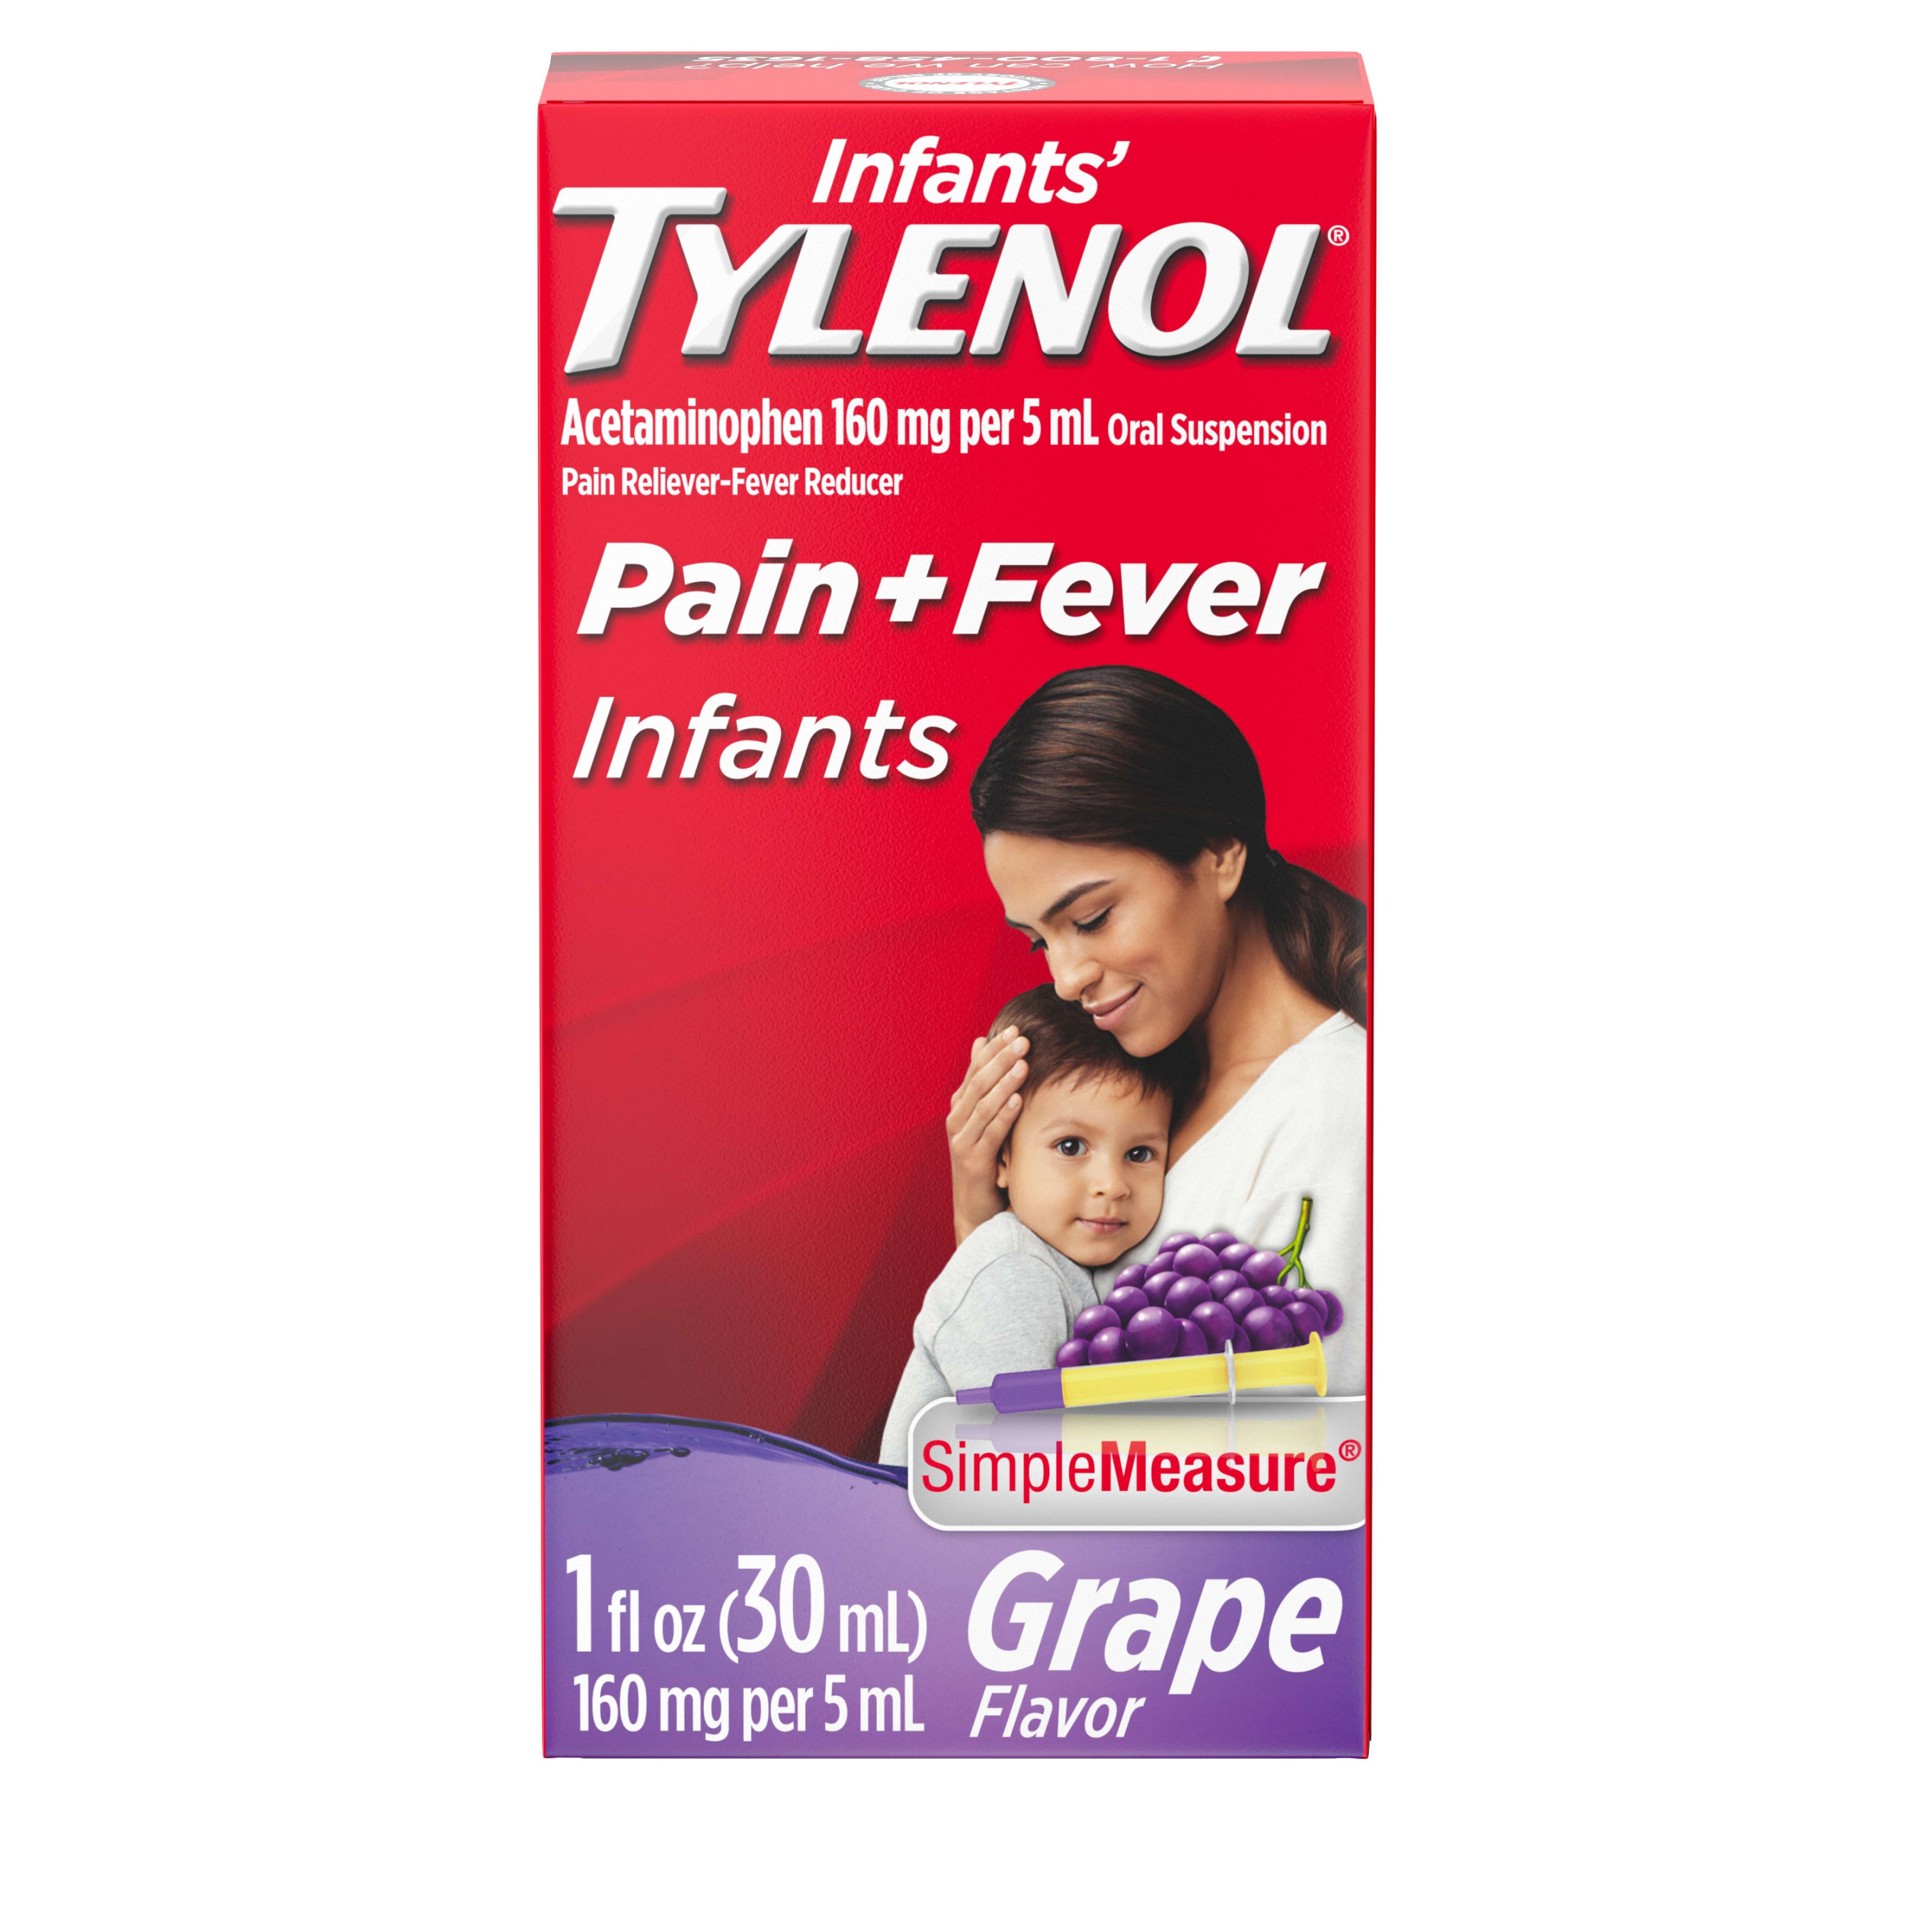 slide 1 of 6, Tylenol Infants' Tylenol Oral Suspension Liquid Medicine with Acetaminophen, Baby Fever Reducer & Pain Reliever for Minor Aches & Pains, Sore Throat, Headache & Toothache, Grape Flavor, 1 fl. oz, 1 fl oz